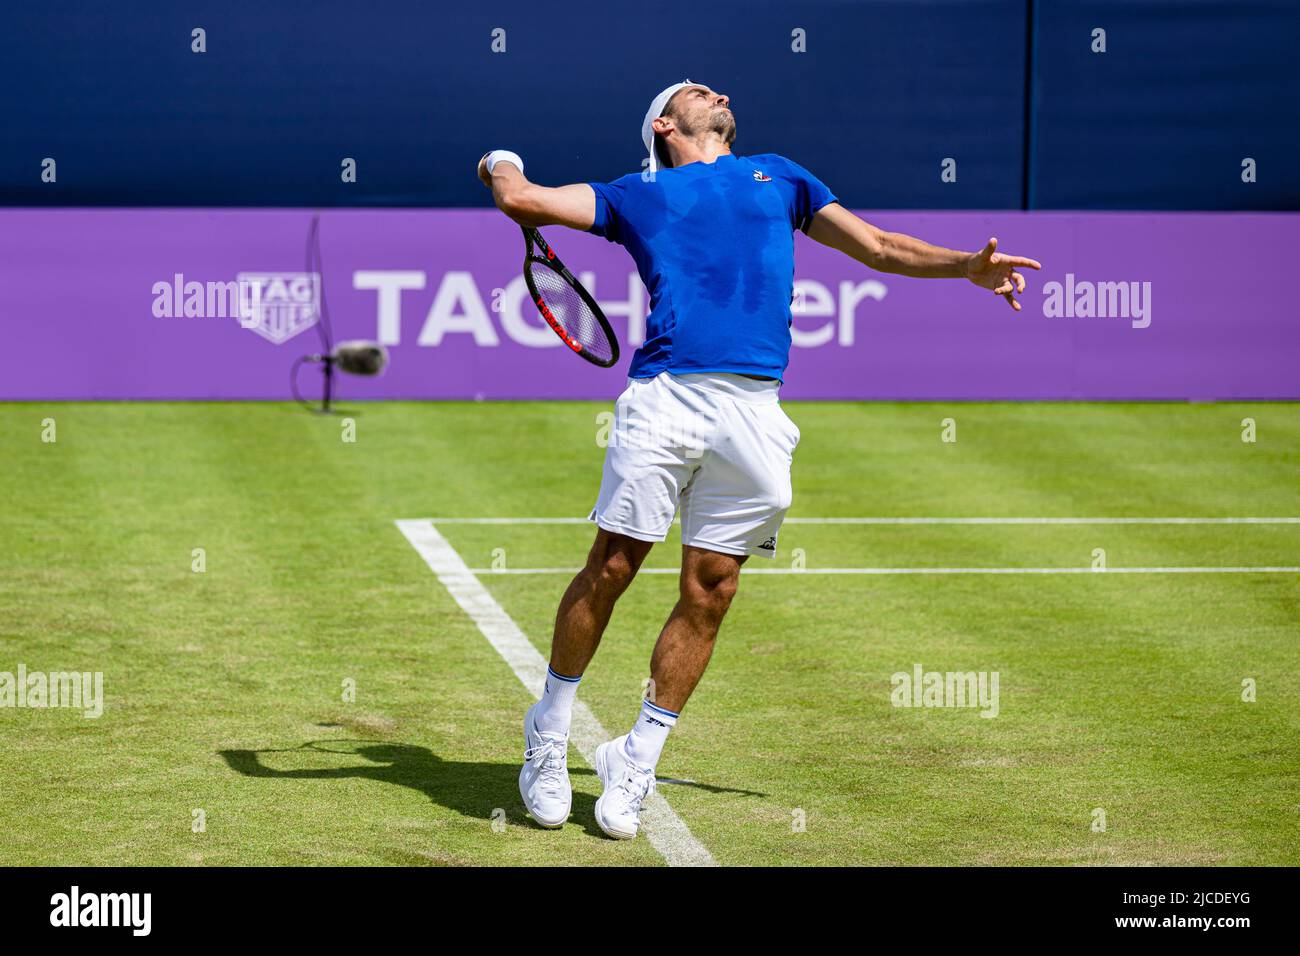 LONDON, UNITED KINGDOM. Jun 12, 2022. Thomas Fabiano (ITA) vs Sam Querrey (USA) during the qualifying match on Day Two of the 2022 Cinch Championships at The Queen's Club on Sunday, June 12, 2022 in LONDON ENGLAND. Credit: Taka G Wu/Alamy Live News Stock Photo